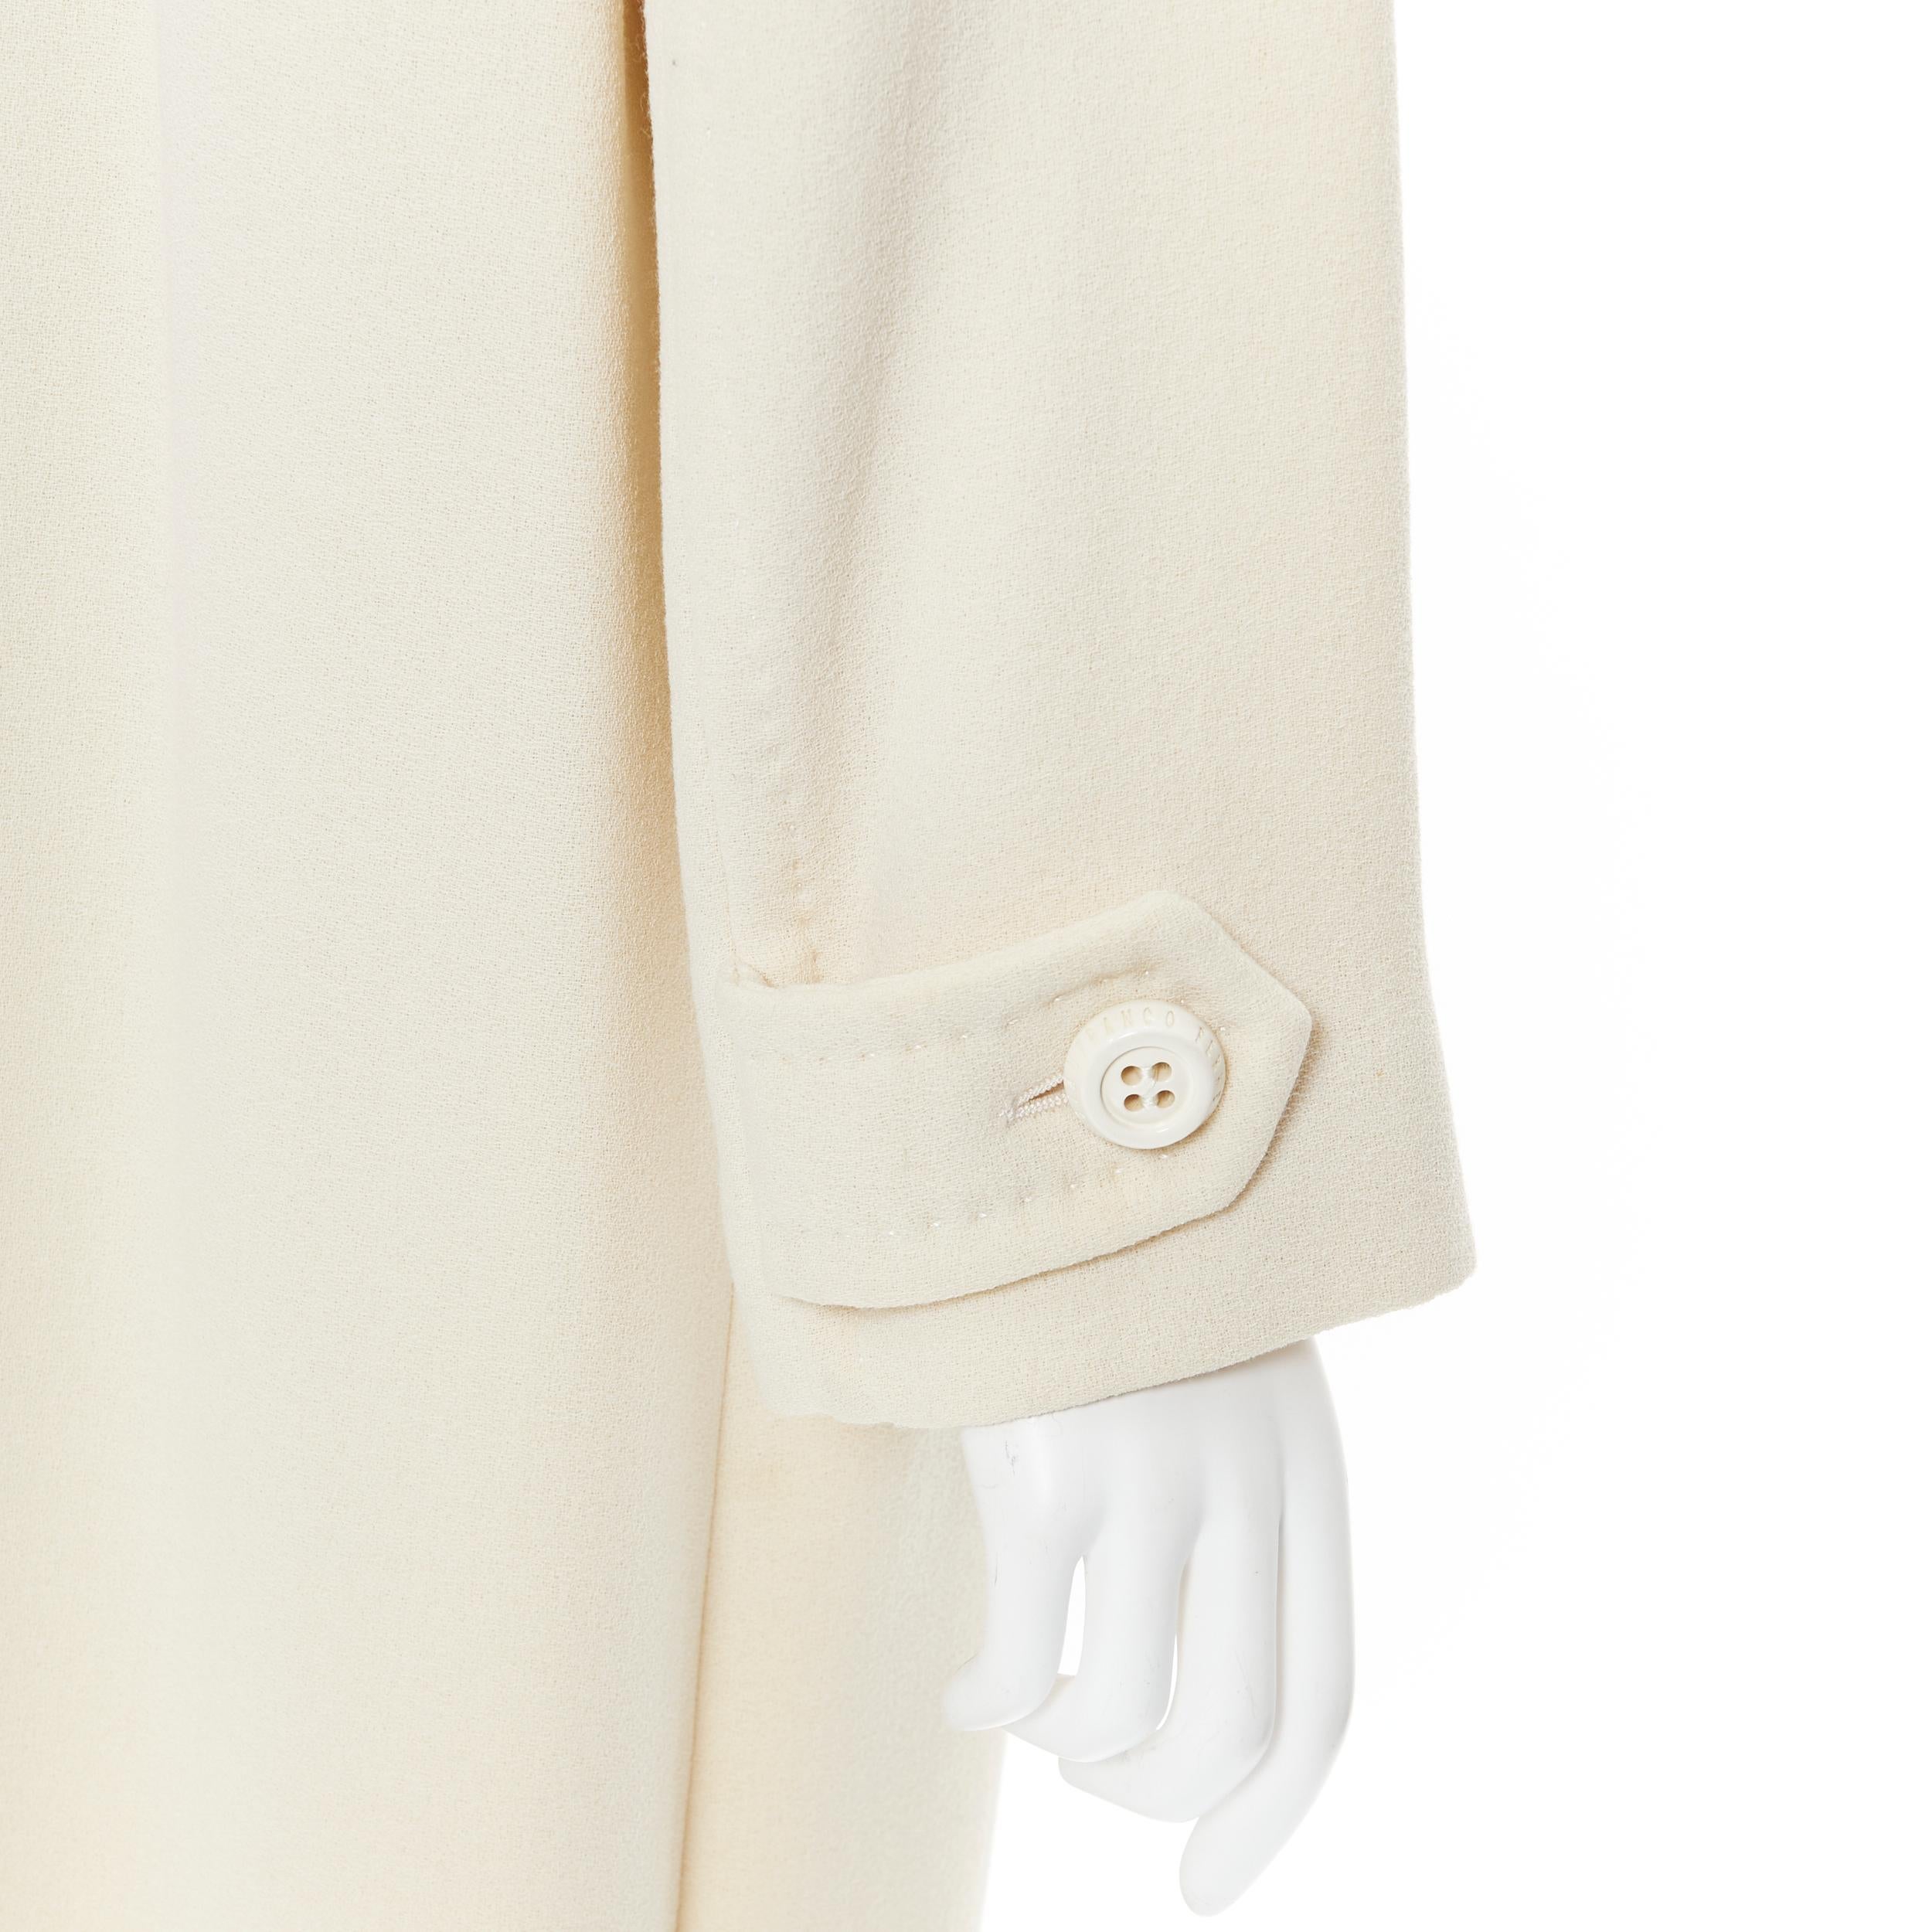 GIANFRANCO FERRE STUDIO ivory wool crepe double breasted coat jacket IT42 M 
Reference: GIYG/A00015 
Brand: Gianfranco Ferre Studio 
Designer: Gianfranco Ferre 
Material: Wool 
Color: White 
Pattern: Solid 
Closure: Button 
Extra Detail: Hand